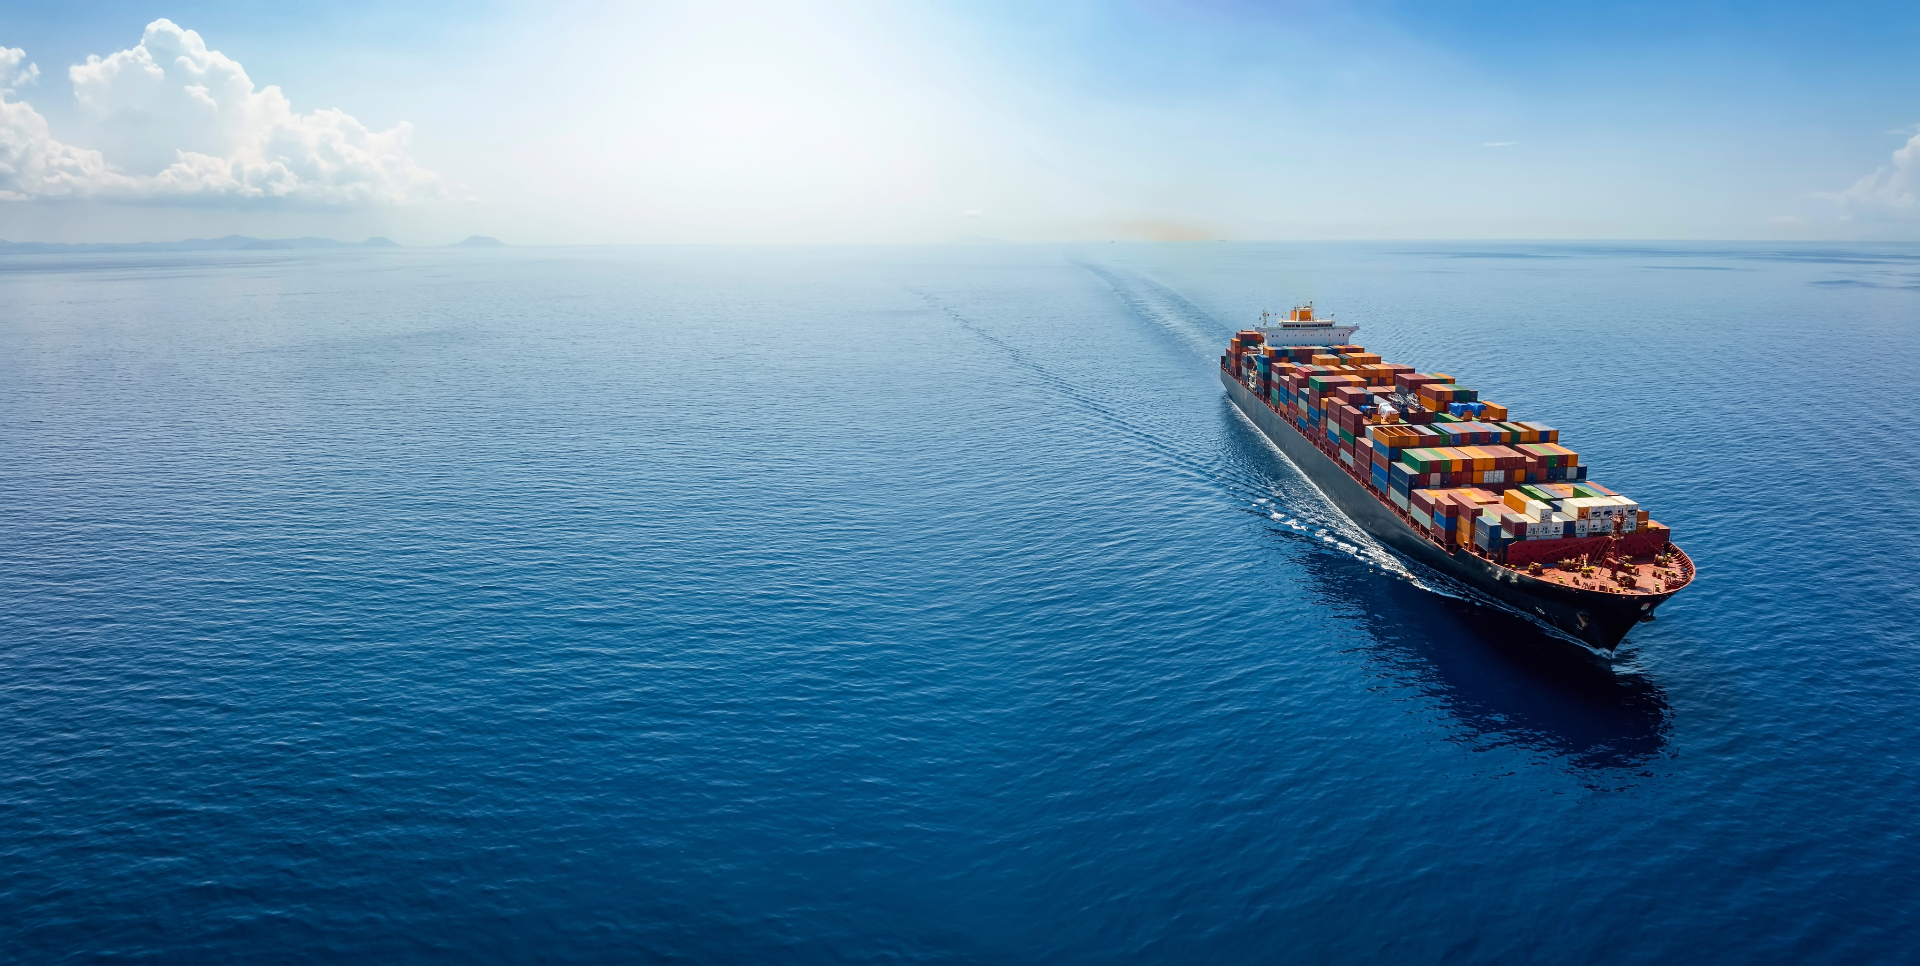 A large cargo ship loaded with colorful containers sailing across a calm blue ocean under a clear sky, with sunlight reflecting on the water.